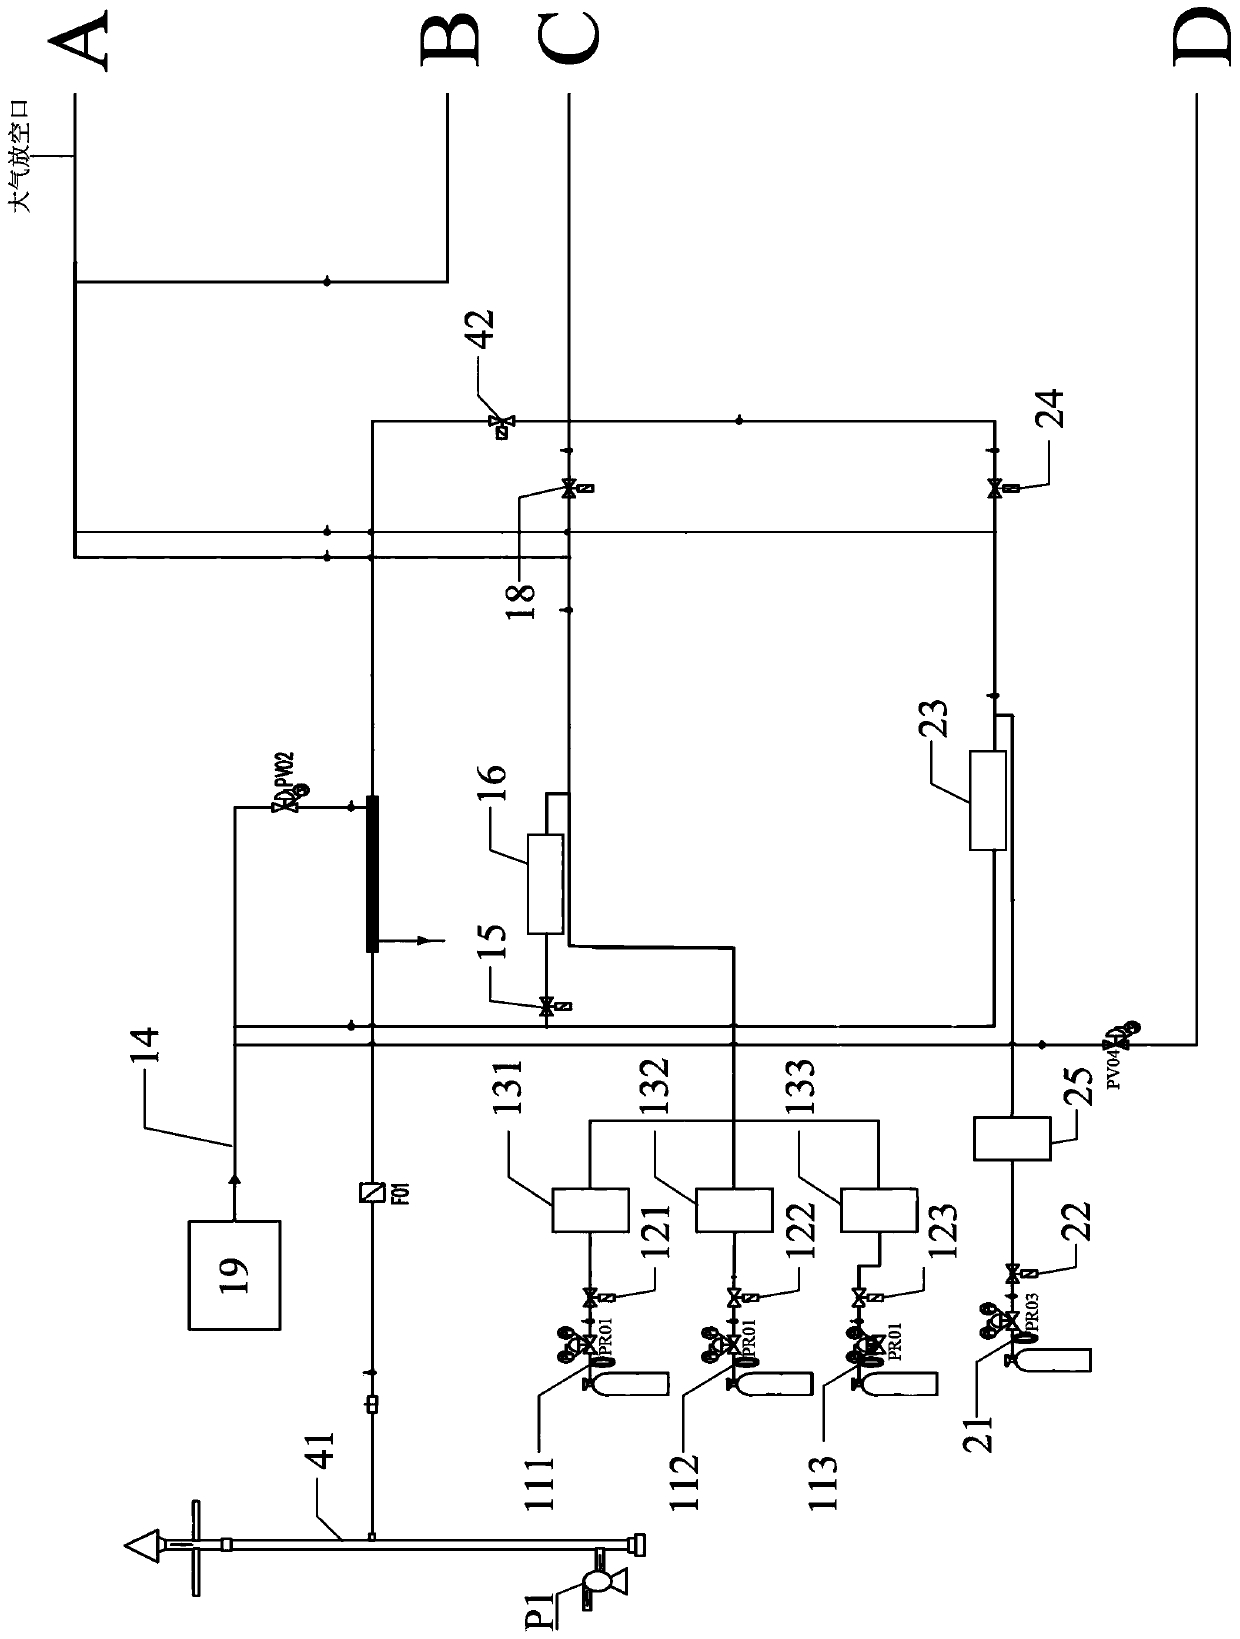 Automatic gas distribution unit and automatic quality control system